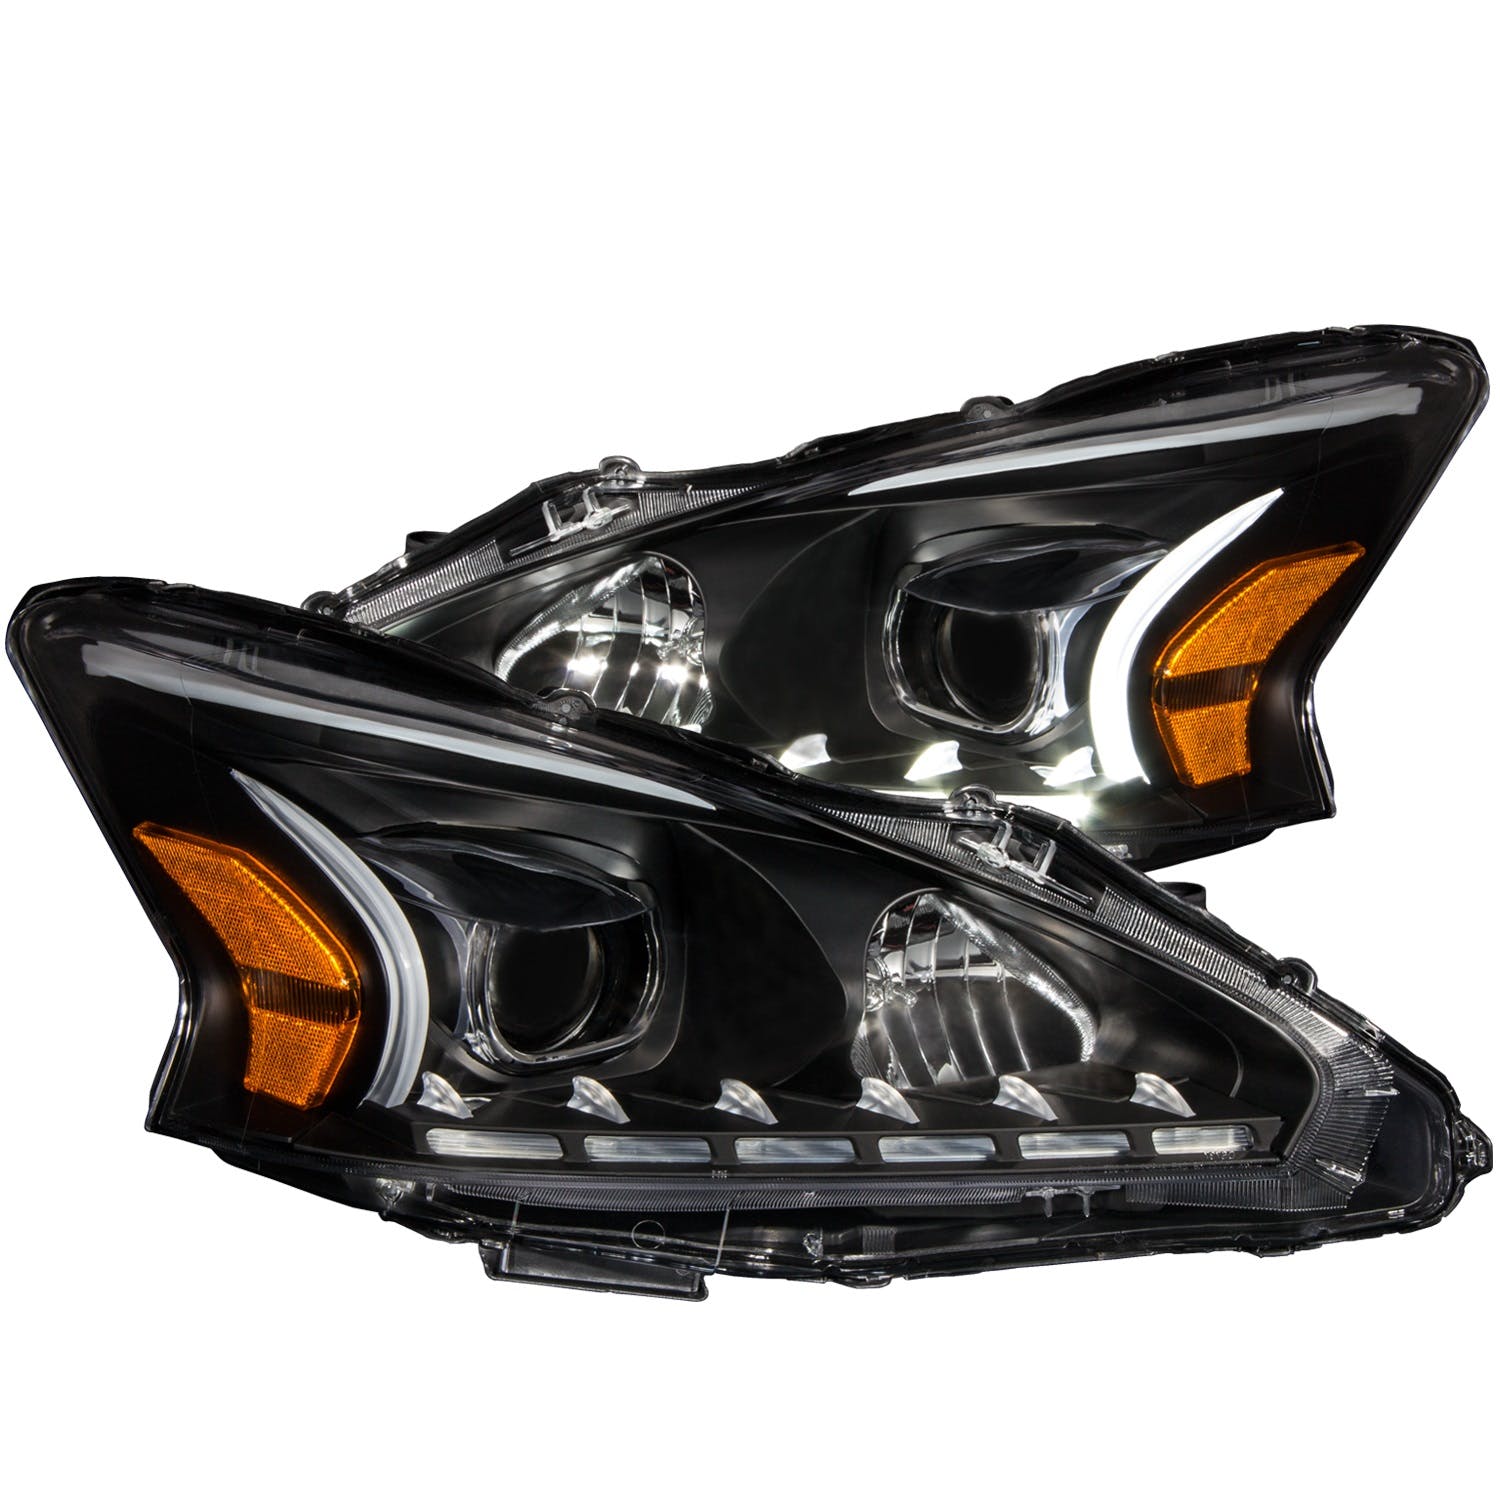 AnzoUSA 121500 Projector Headlights with Plank Style Design Black